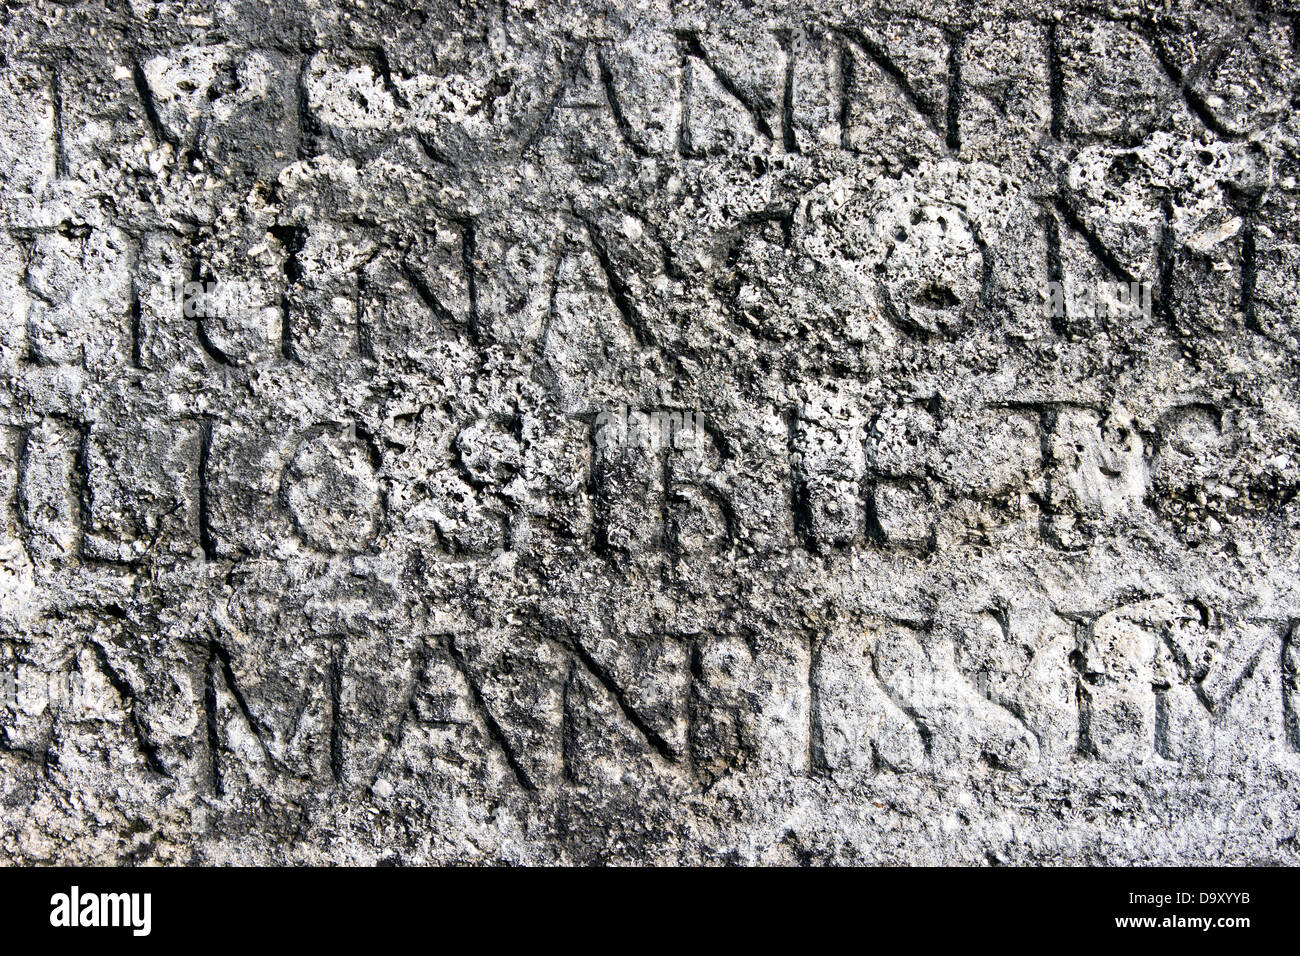 Roman letters stone texture as background Stock Photo